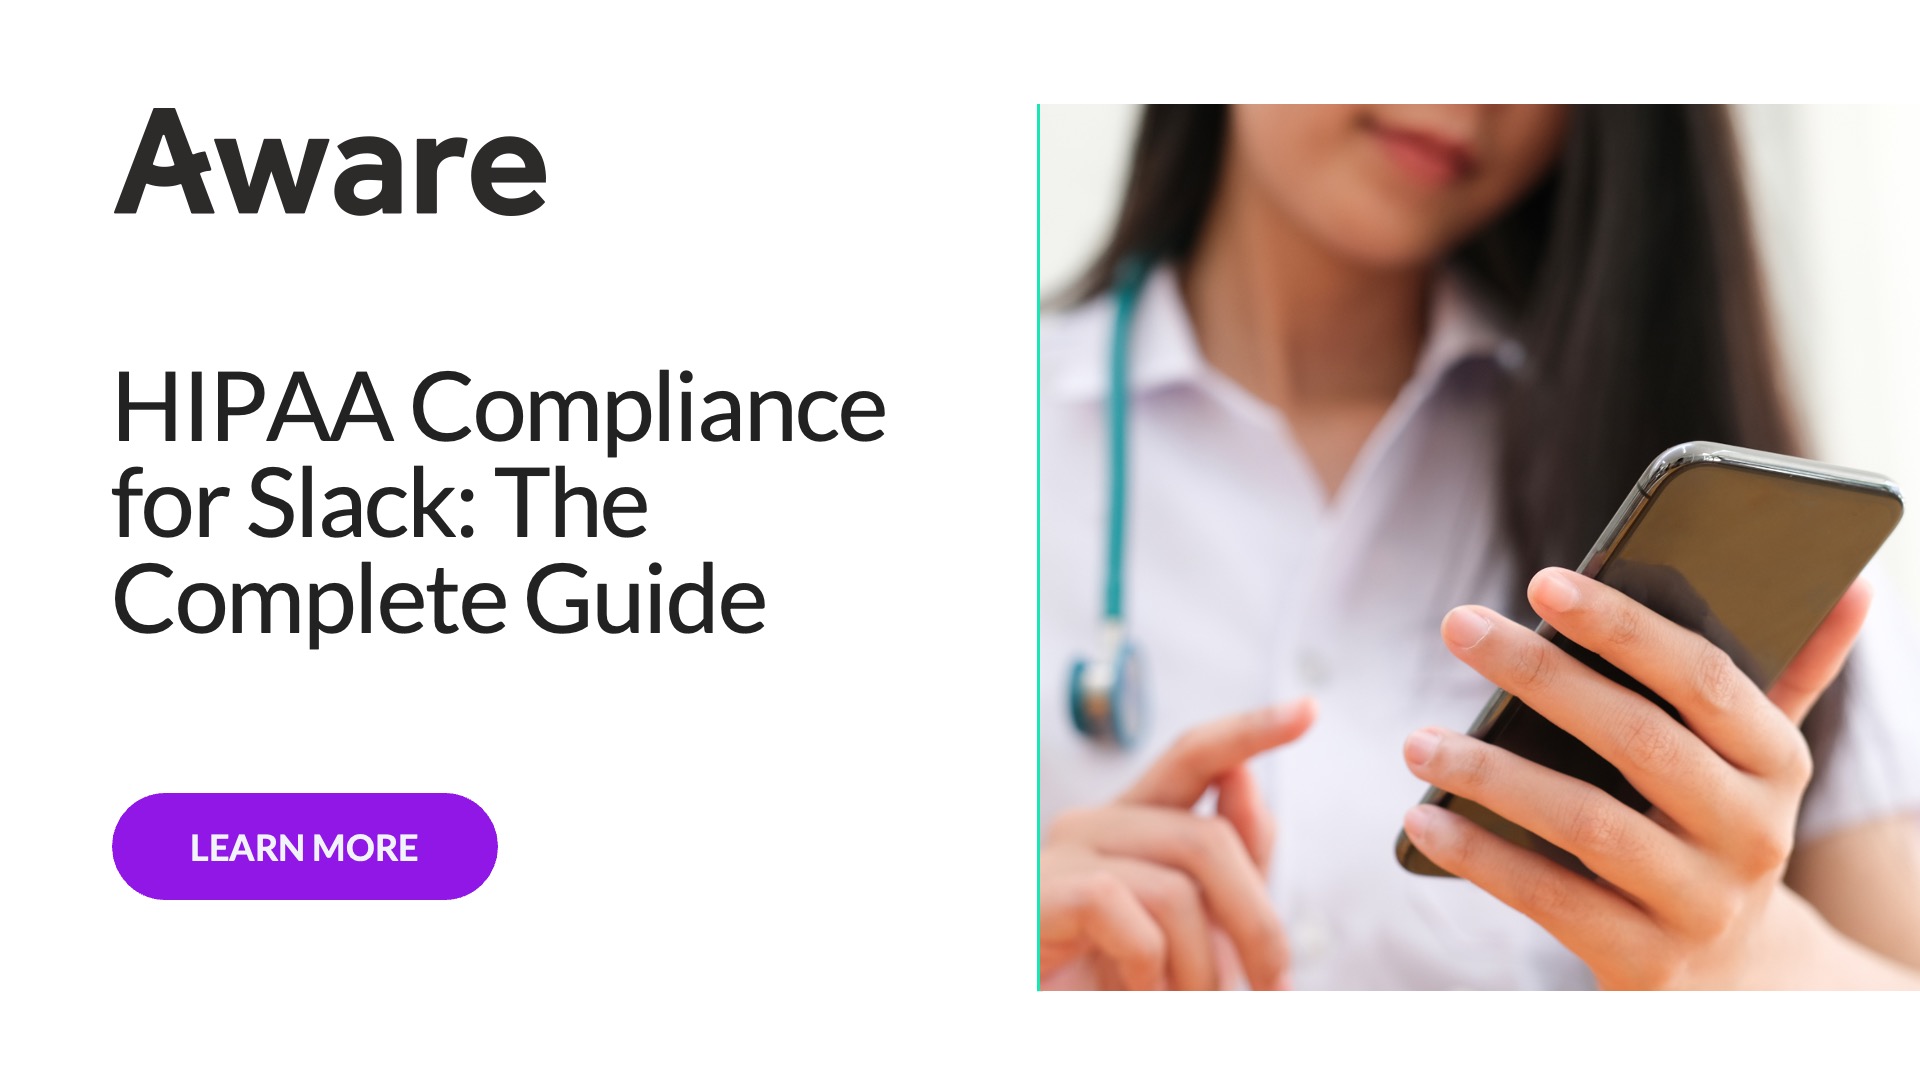 HIPAA Compliance for Slack: The Complete Guide